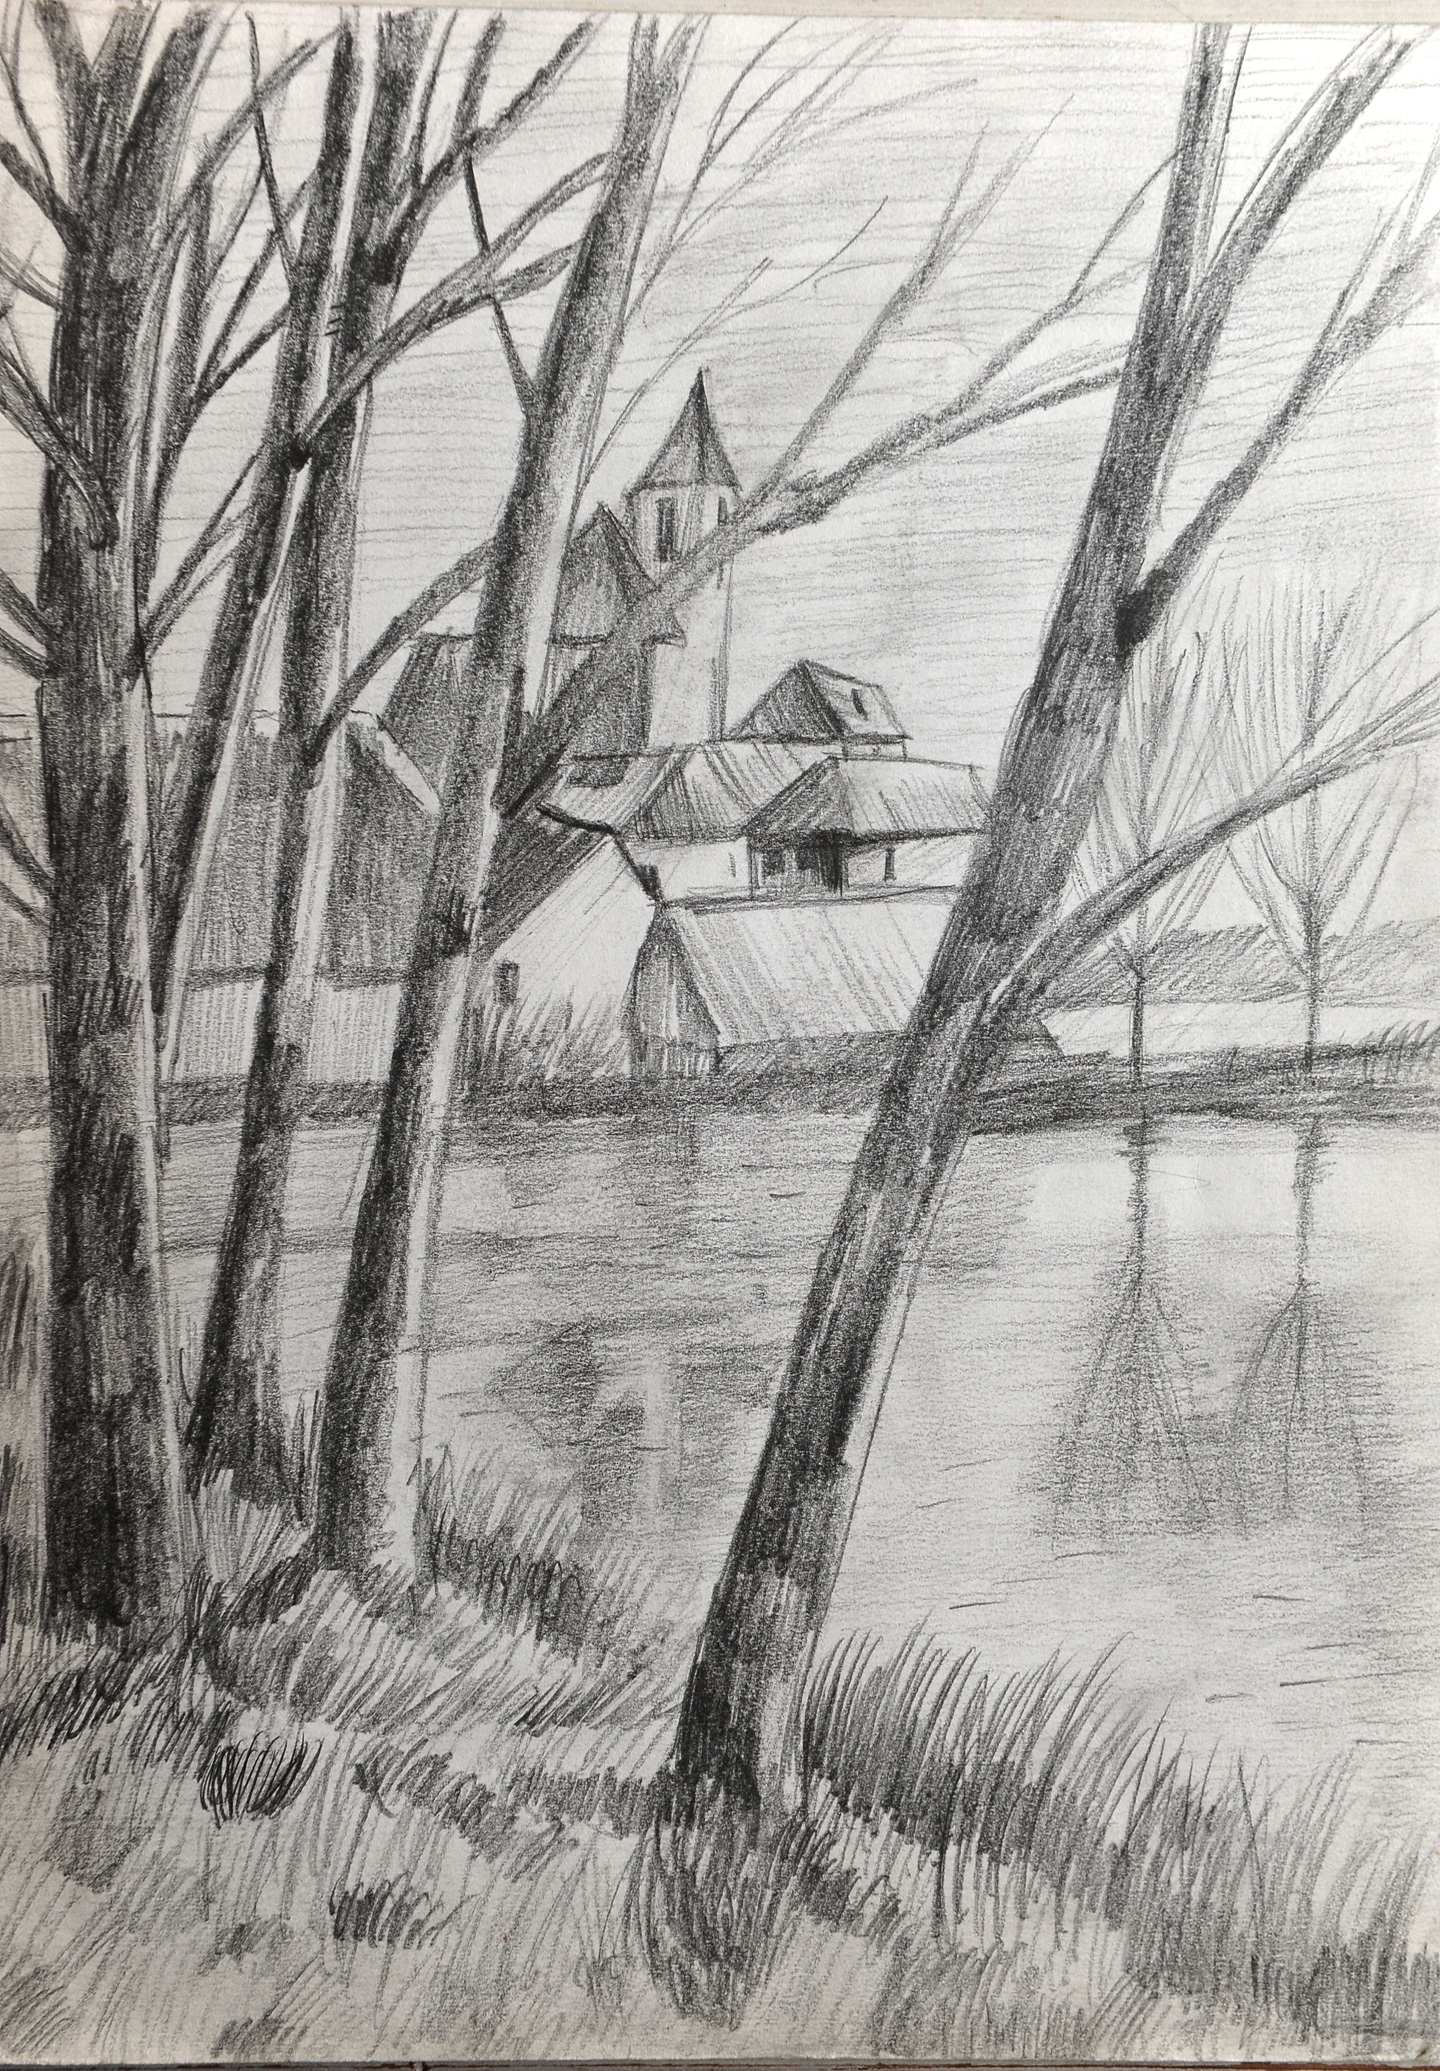 A black and white landscape drawing